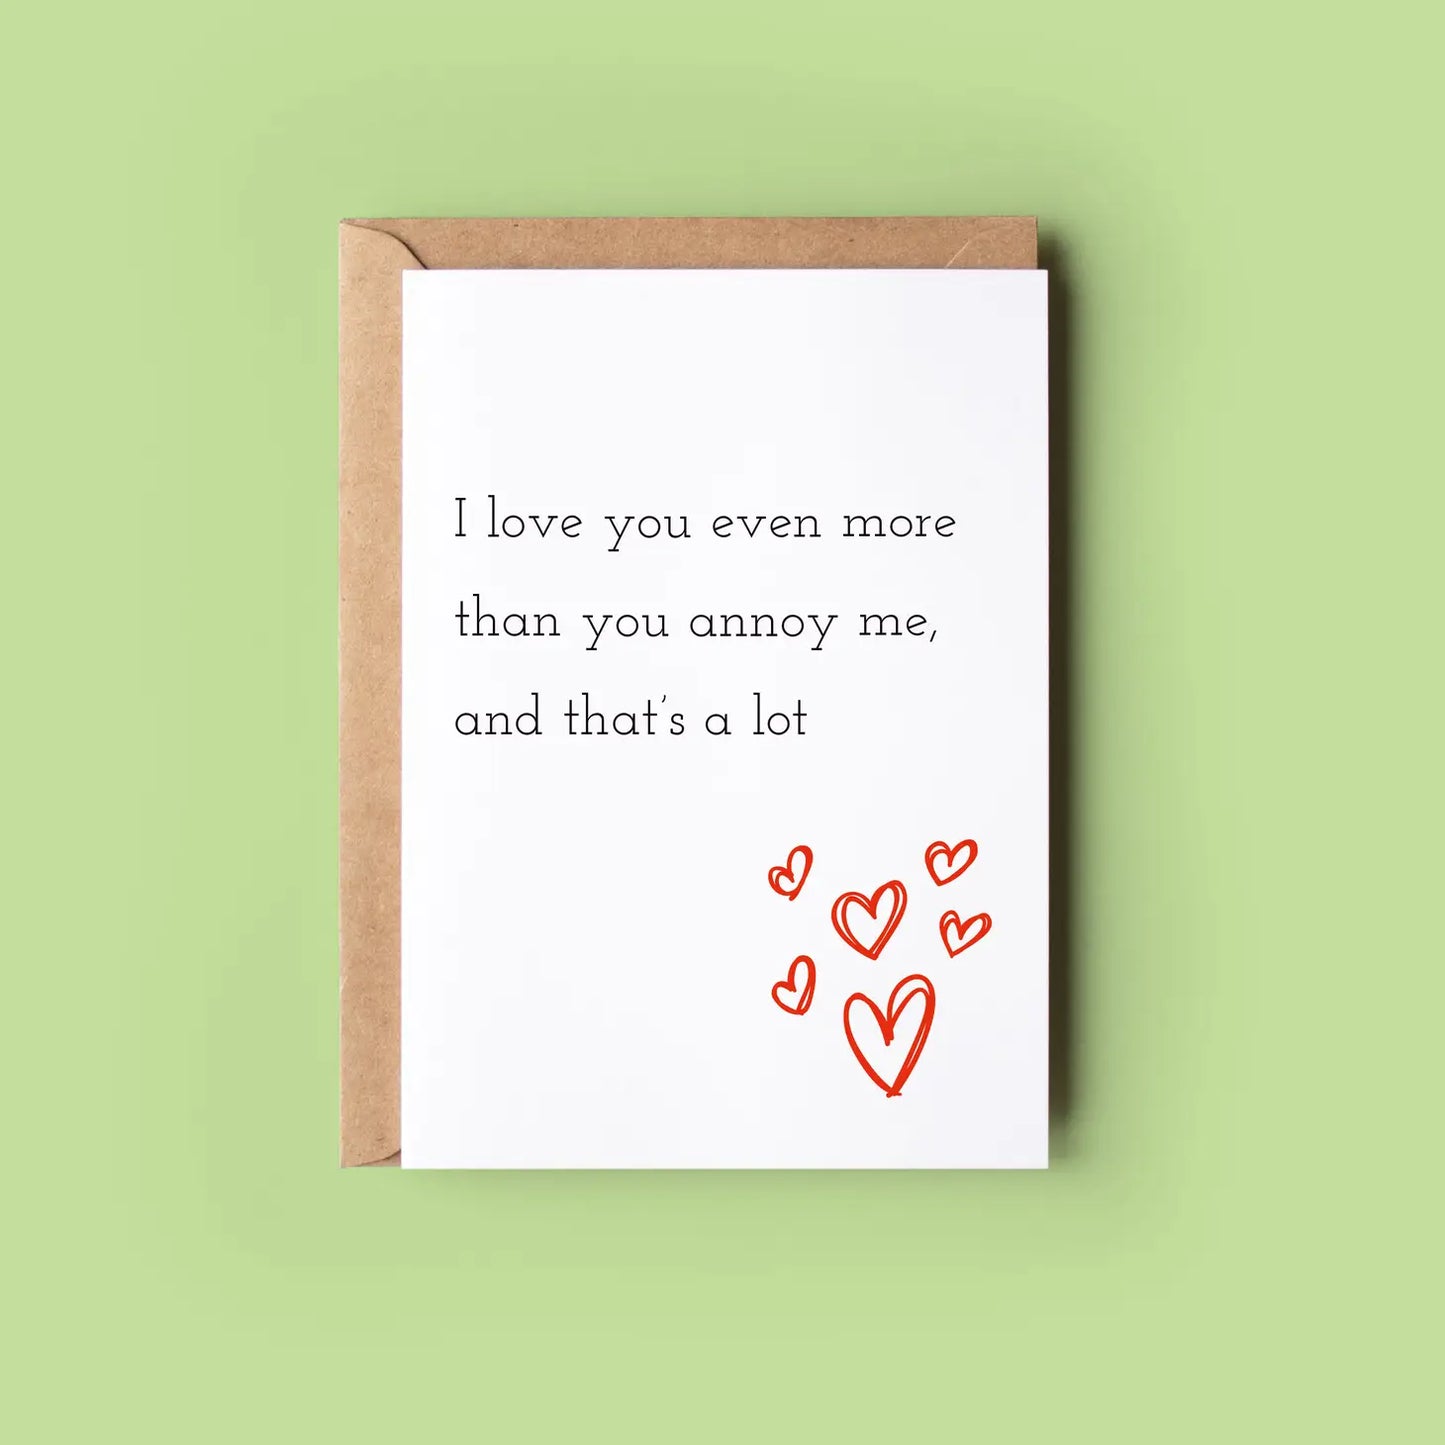 I Love You Even More Than You Annoy Me - Greeting Cards Made in Ireland